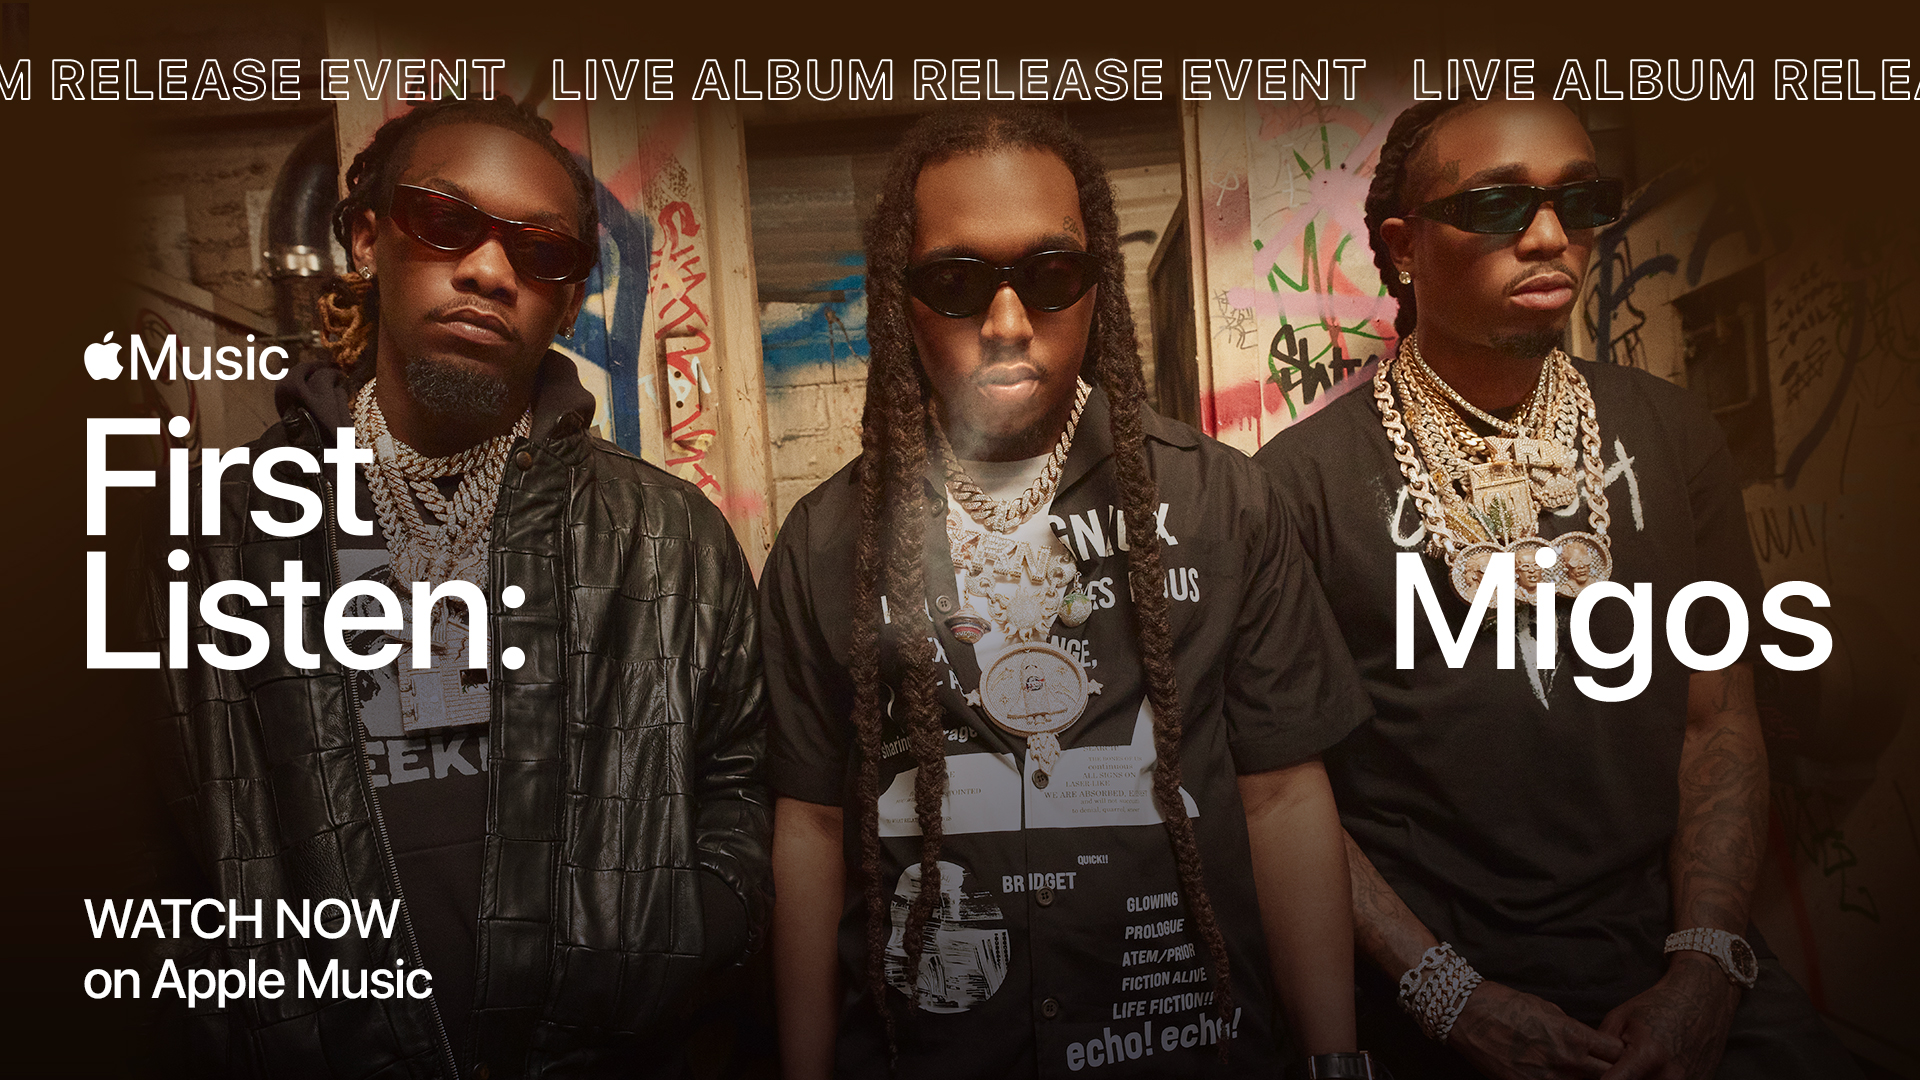 Twitter 上的apple Music Minutes Away From Firstlistenmigos Hosted By Zanelowe Watch A Live Listening Session With Migos As They Play Songs From Cultureiii And Answer Your Questions T Co Ef4dfrxyis T Co Gc0k3e2b6e Twitter